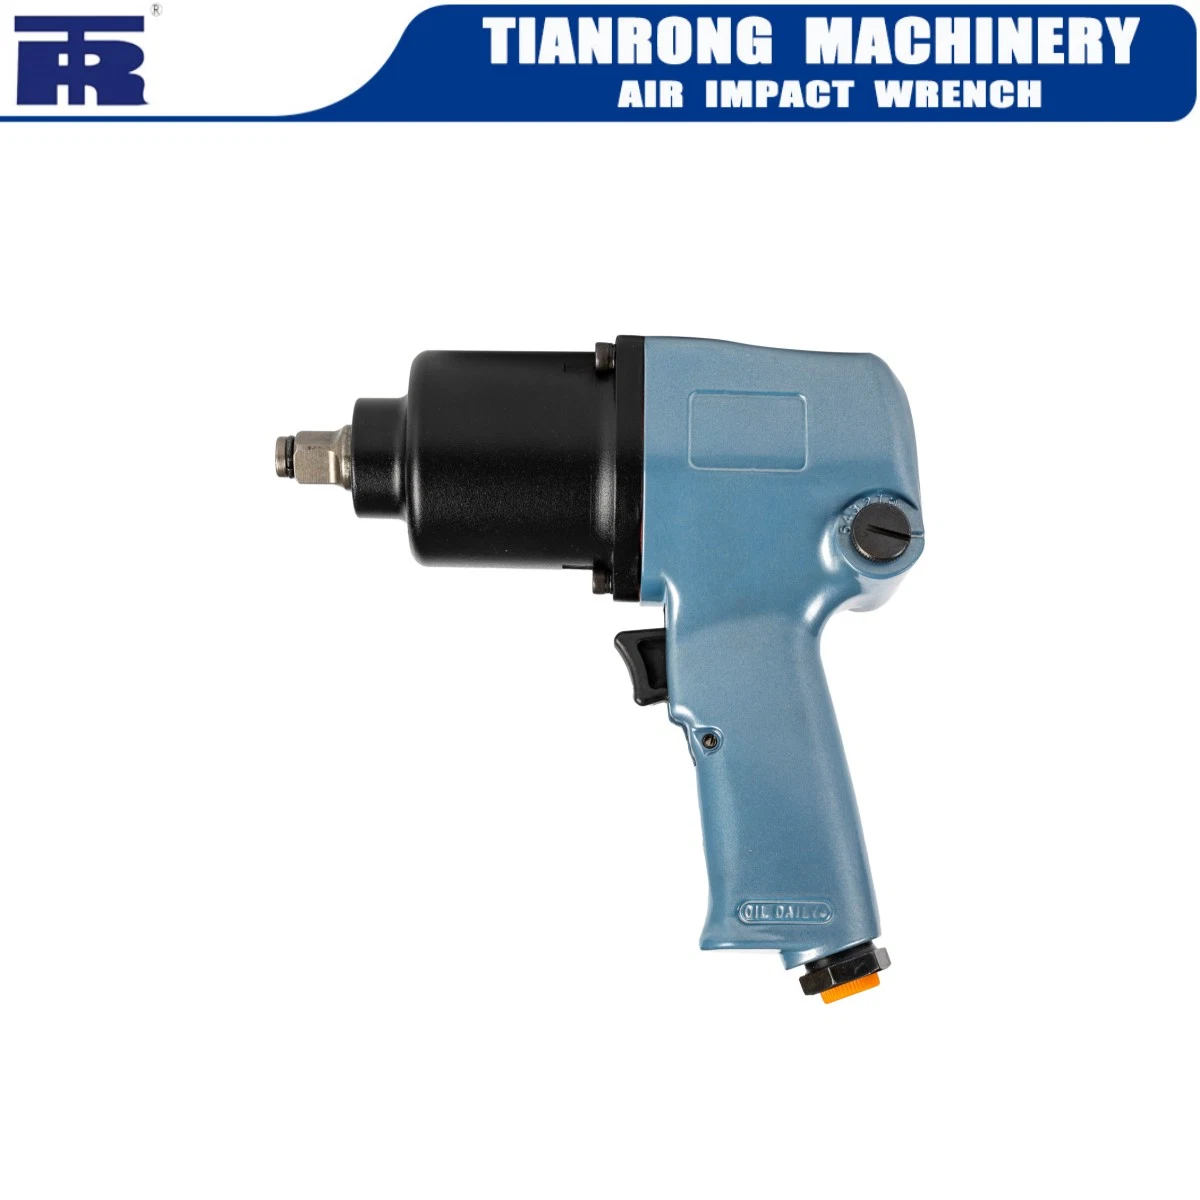 1/2 Inch Pneumatic Tool, Air Impact Wrench, Adopts a Double Hammer Striking Structure, Coupled with Lightweight, High Impact Frequency, and Long Service Life